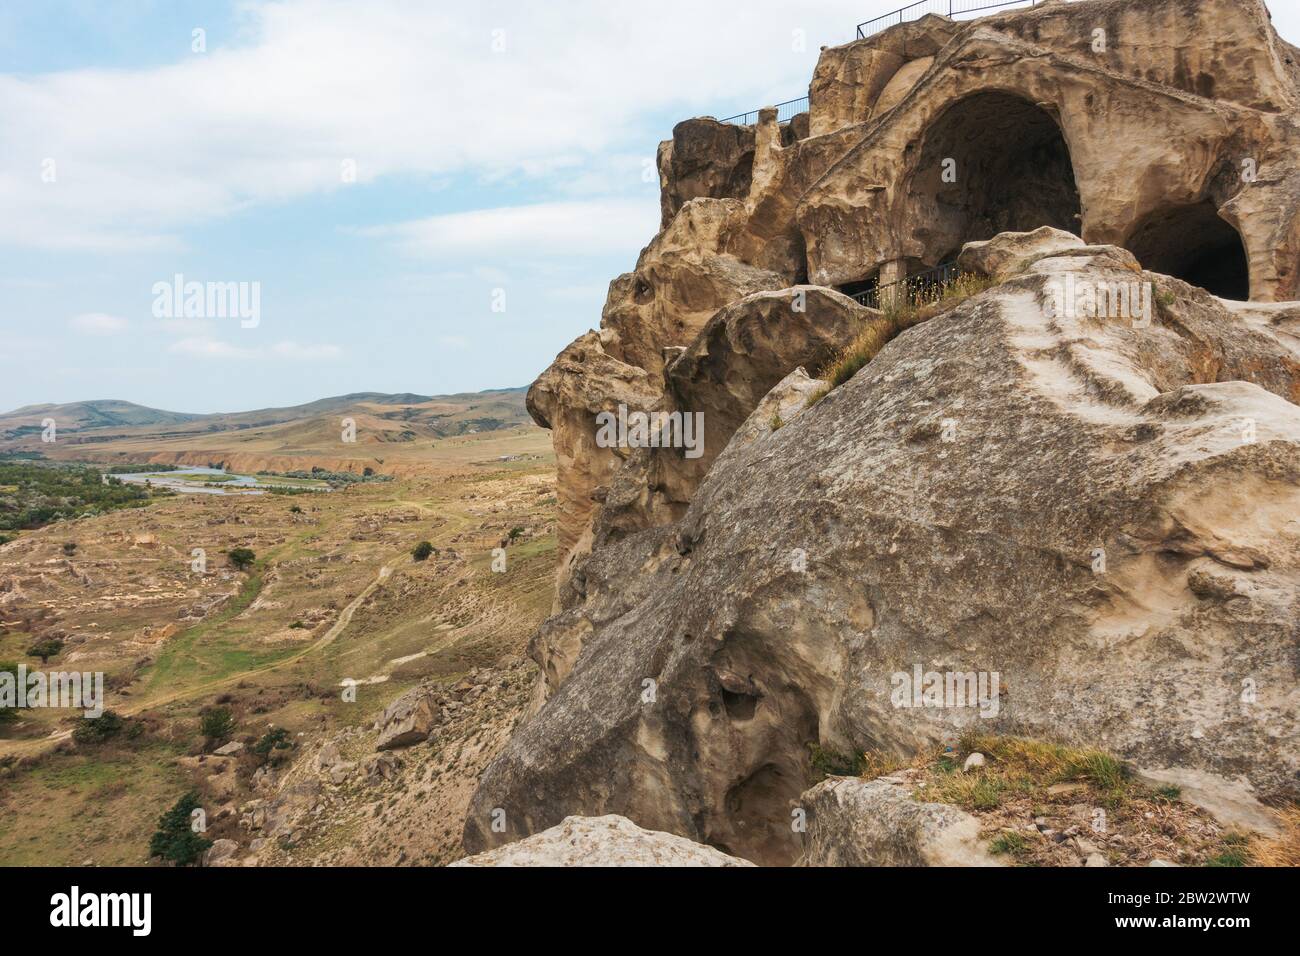 Looking to the Mtkvari River from Uplistsikhe, an ancient rock-hewn town dating back to the Iron Age, near Gori, Georgia Stock Photo